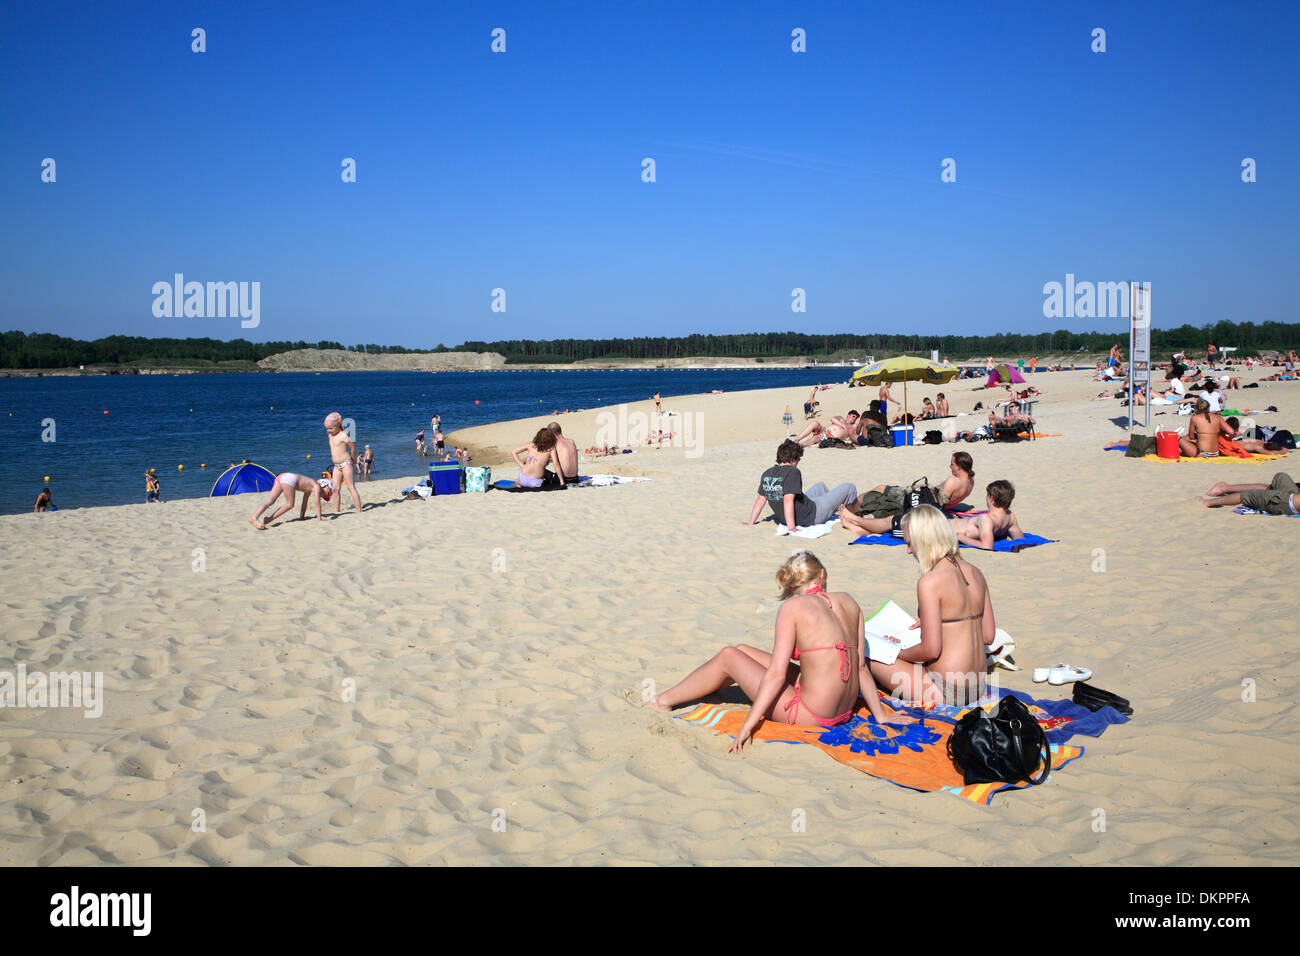 Download this stock image: Haltern am See, Beach Silbersee 2, Muensterland,...